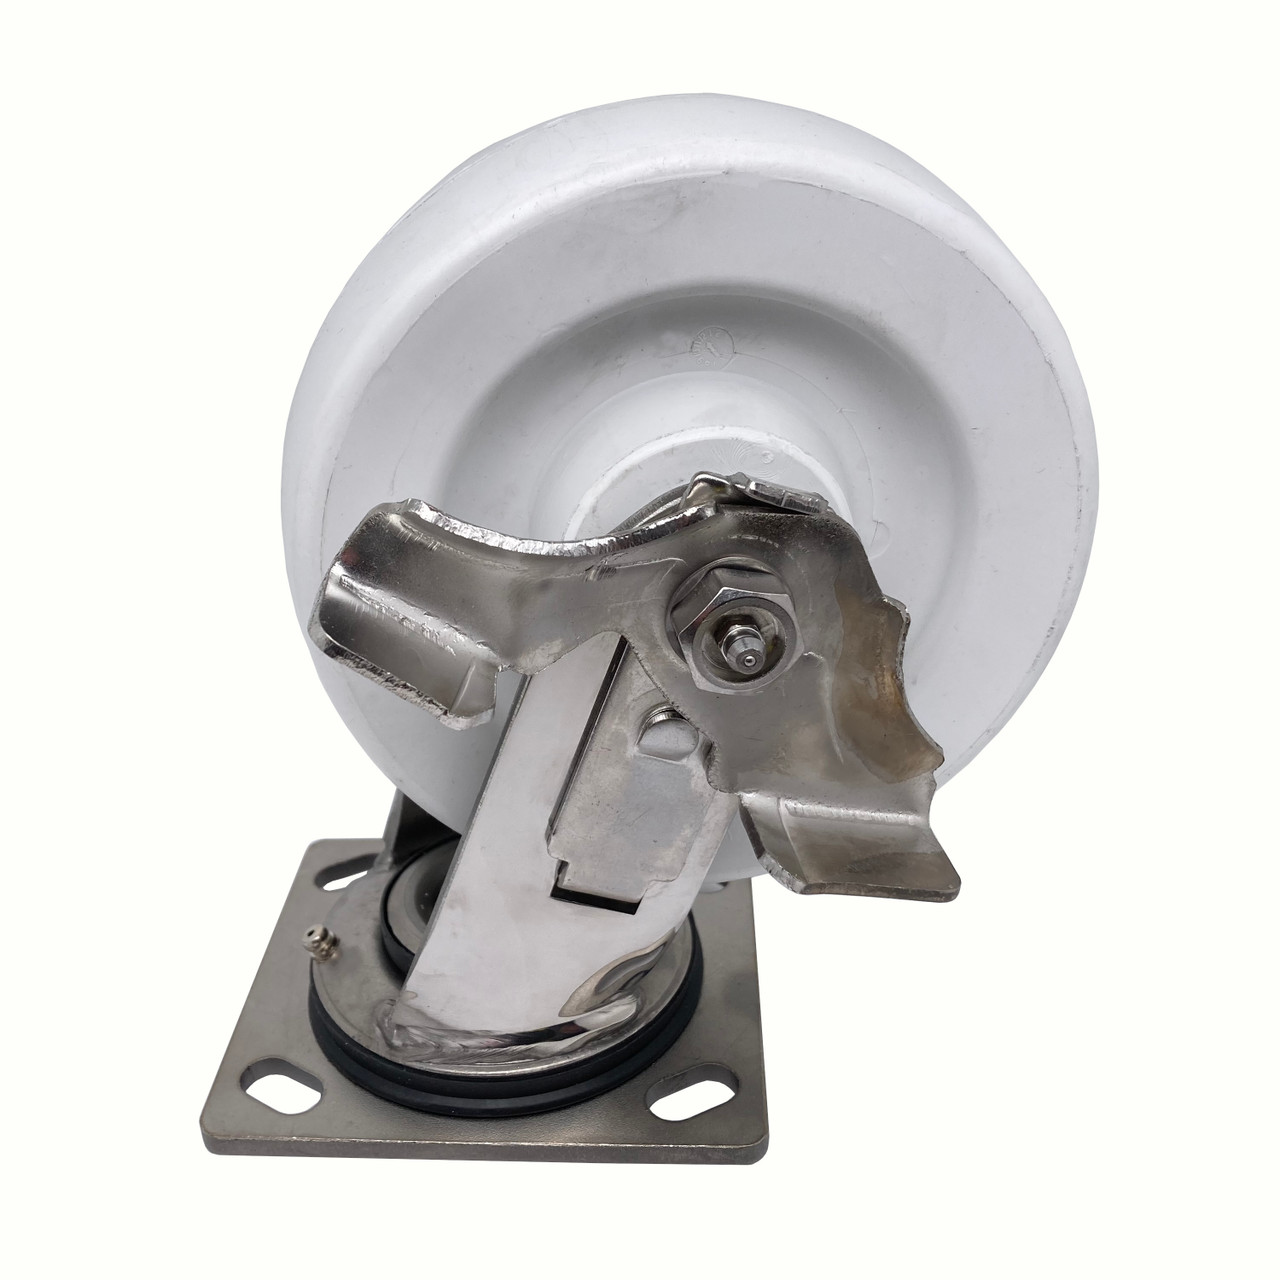 6" 316 stainless steel swivel caster with brake